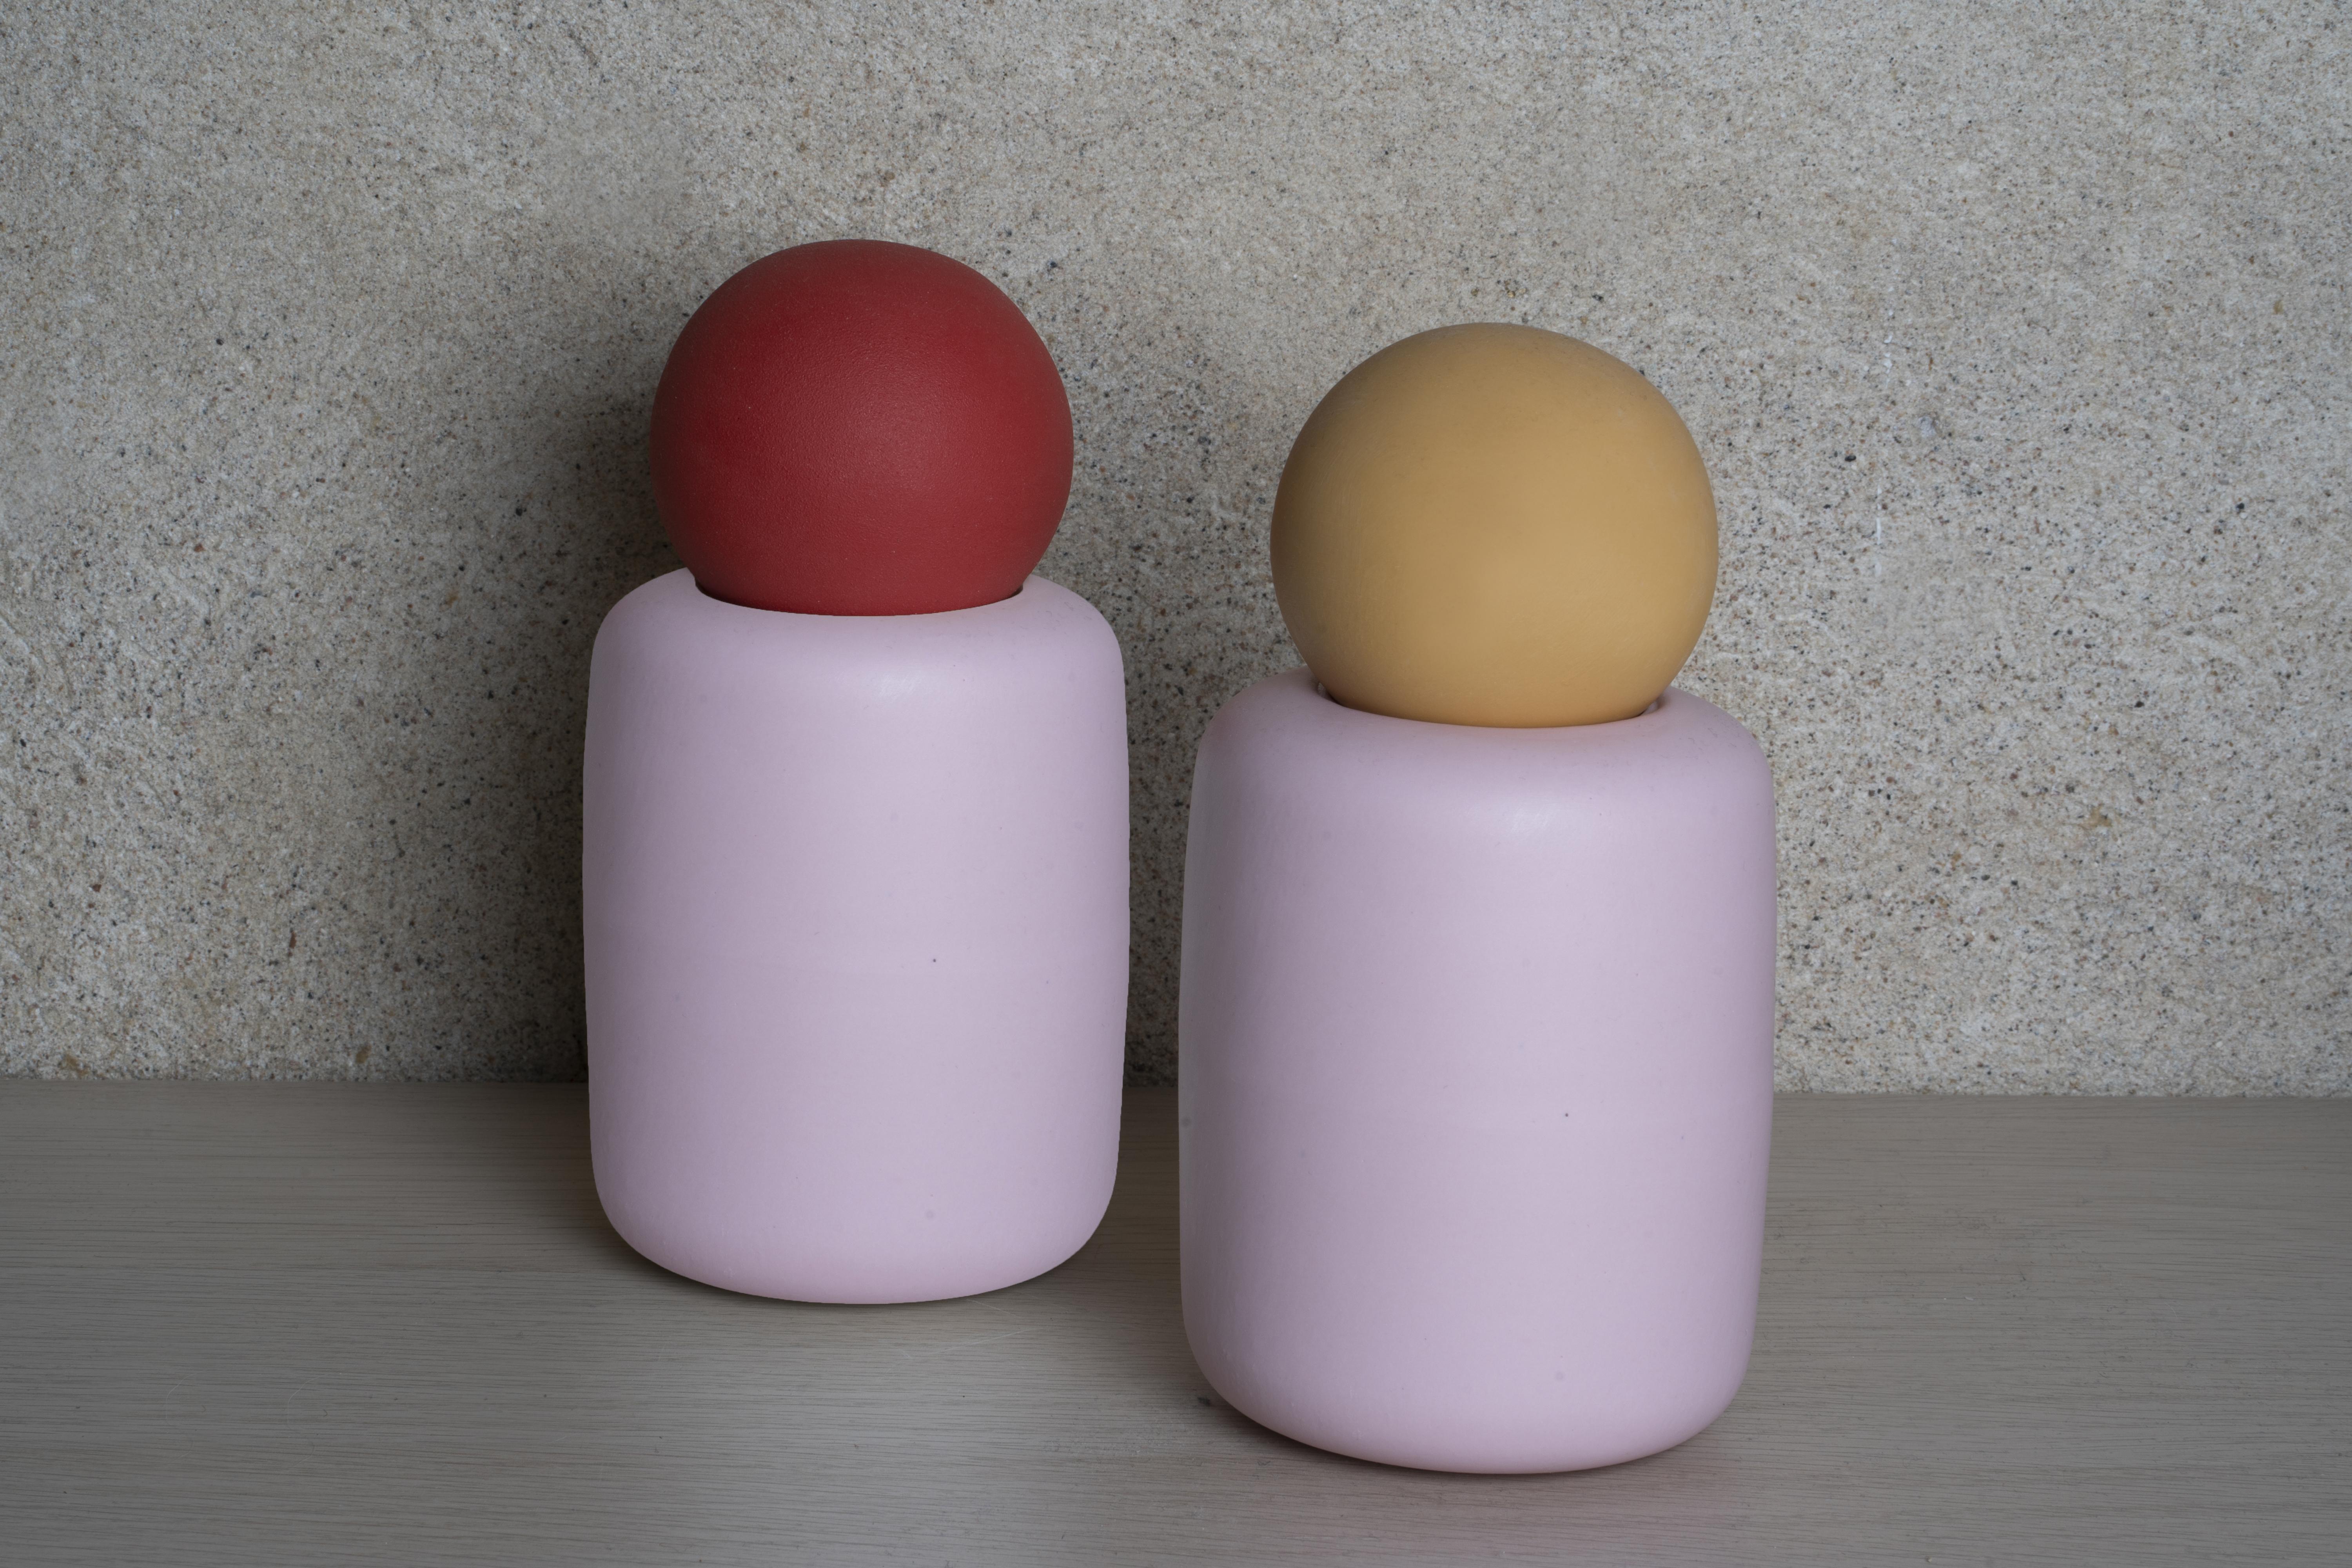 O-Jar is a sculptural hand made porcelain vessel. A soft pink colored matte porcelain body is complemented with an oversized ball cap. The inside of the vessel is glazed and suitable for food storage.

Each jar is handmade by the artist in